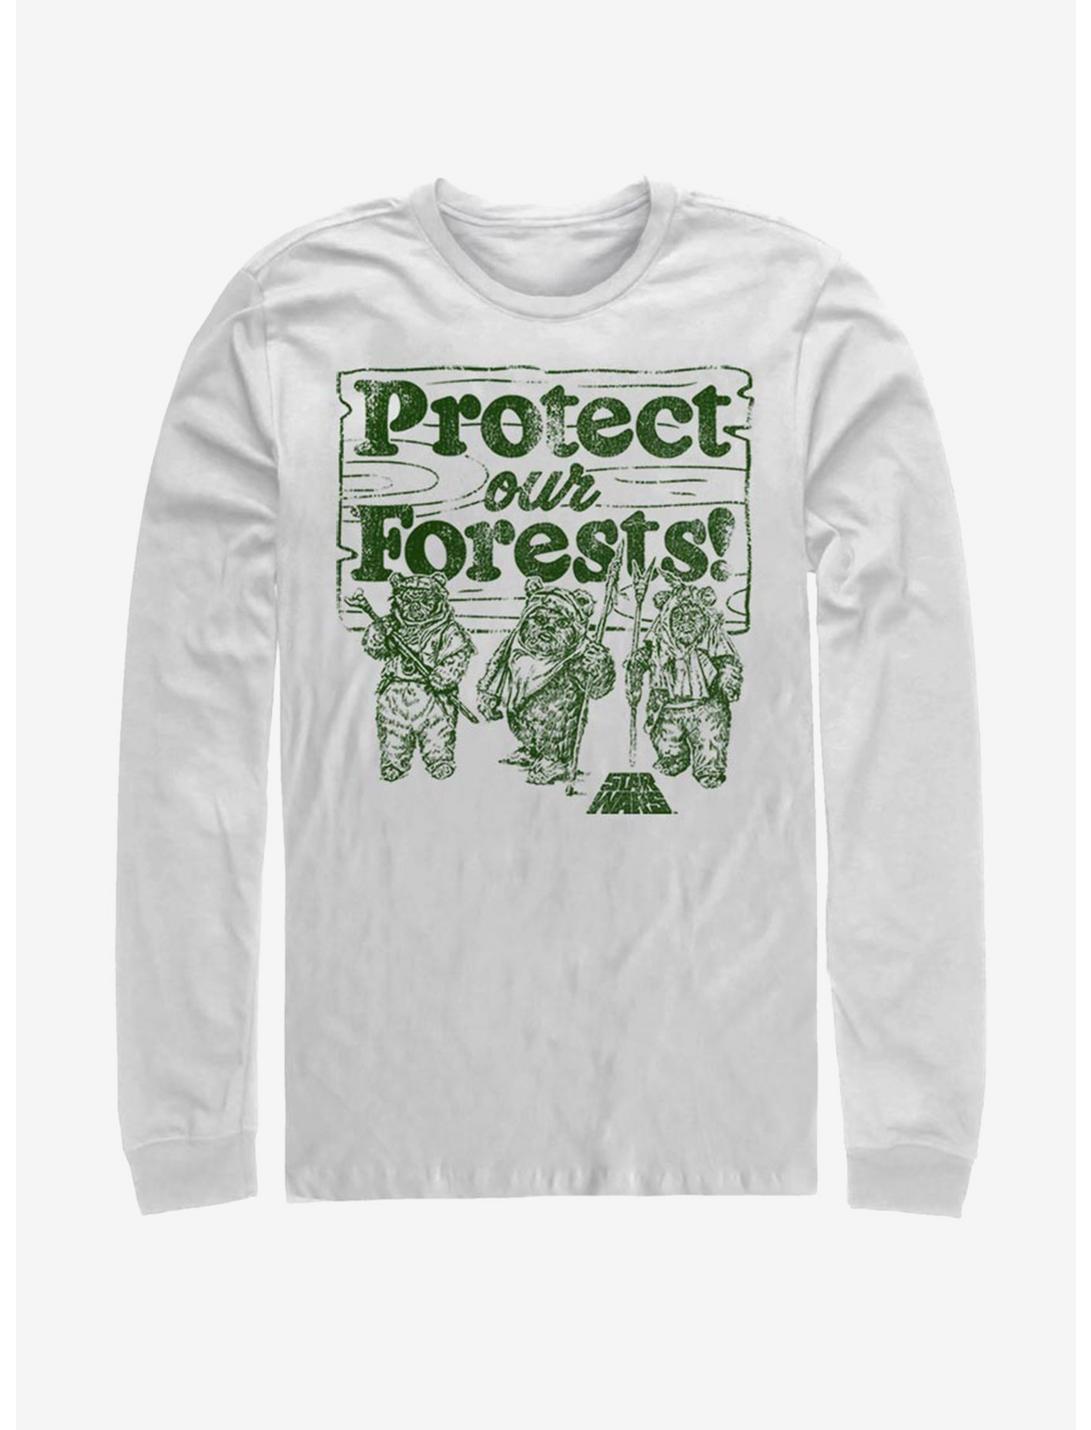 Star Wars Protect Our Forests Long-Sleeve T-Shirt, WHITE, hi-res